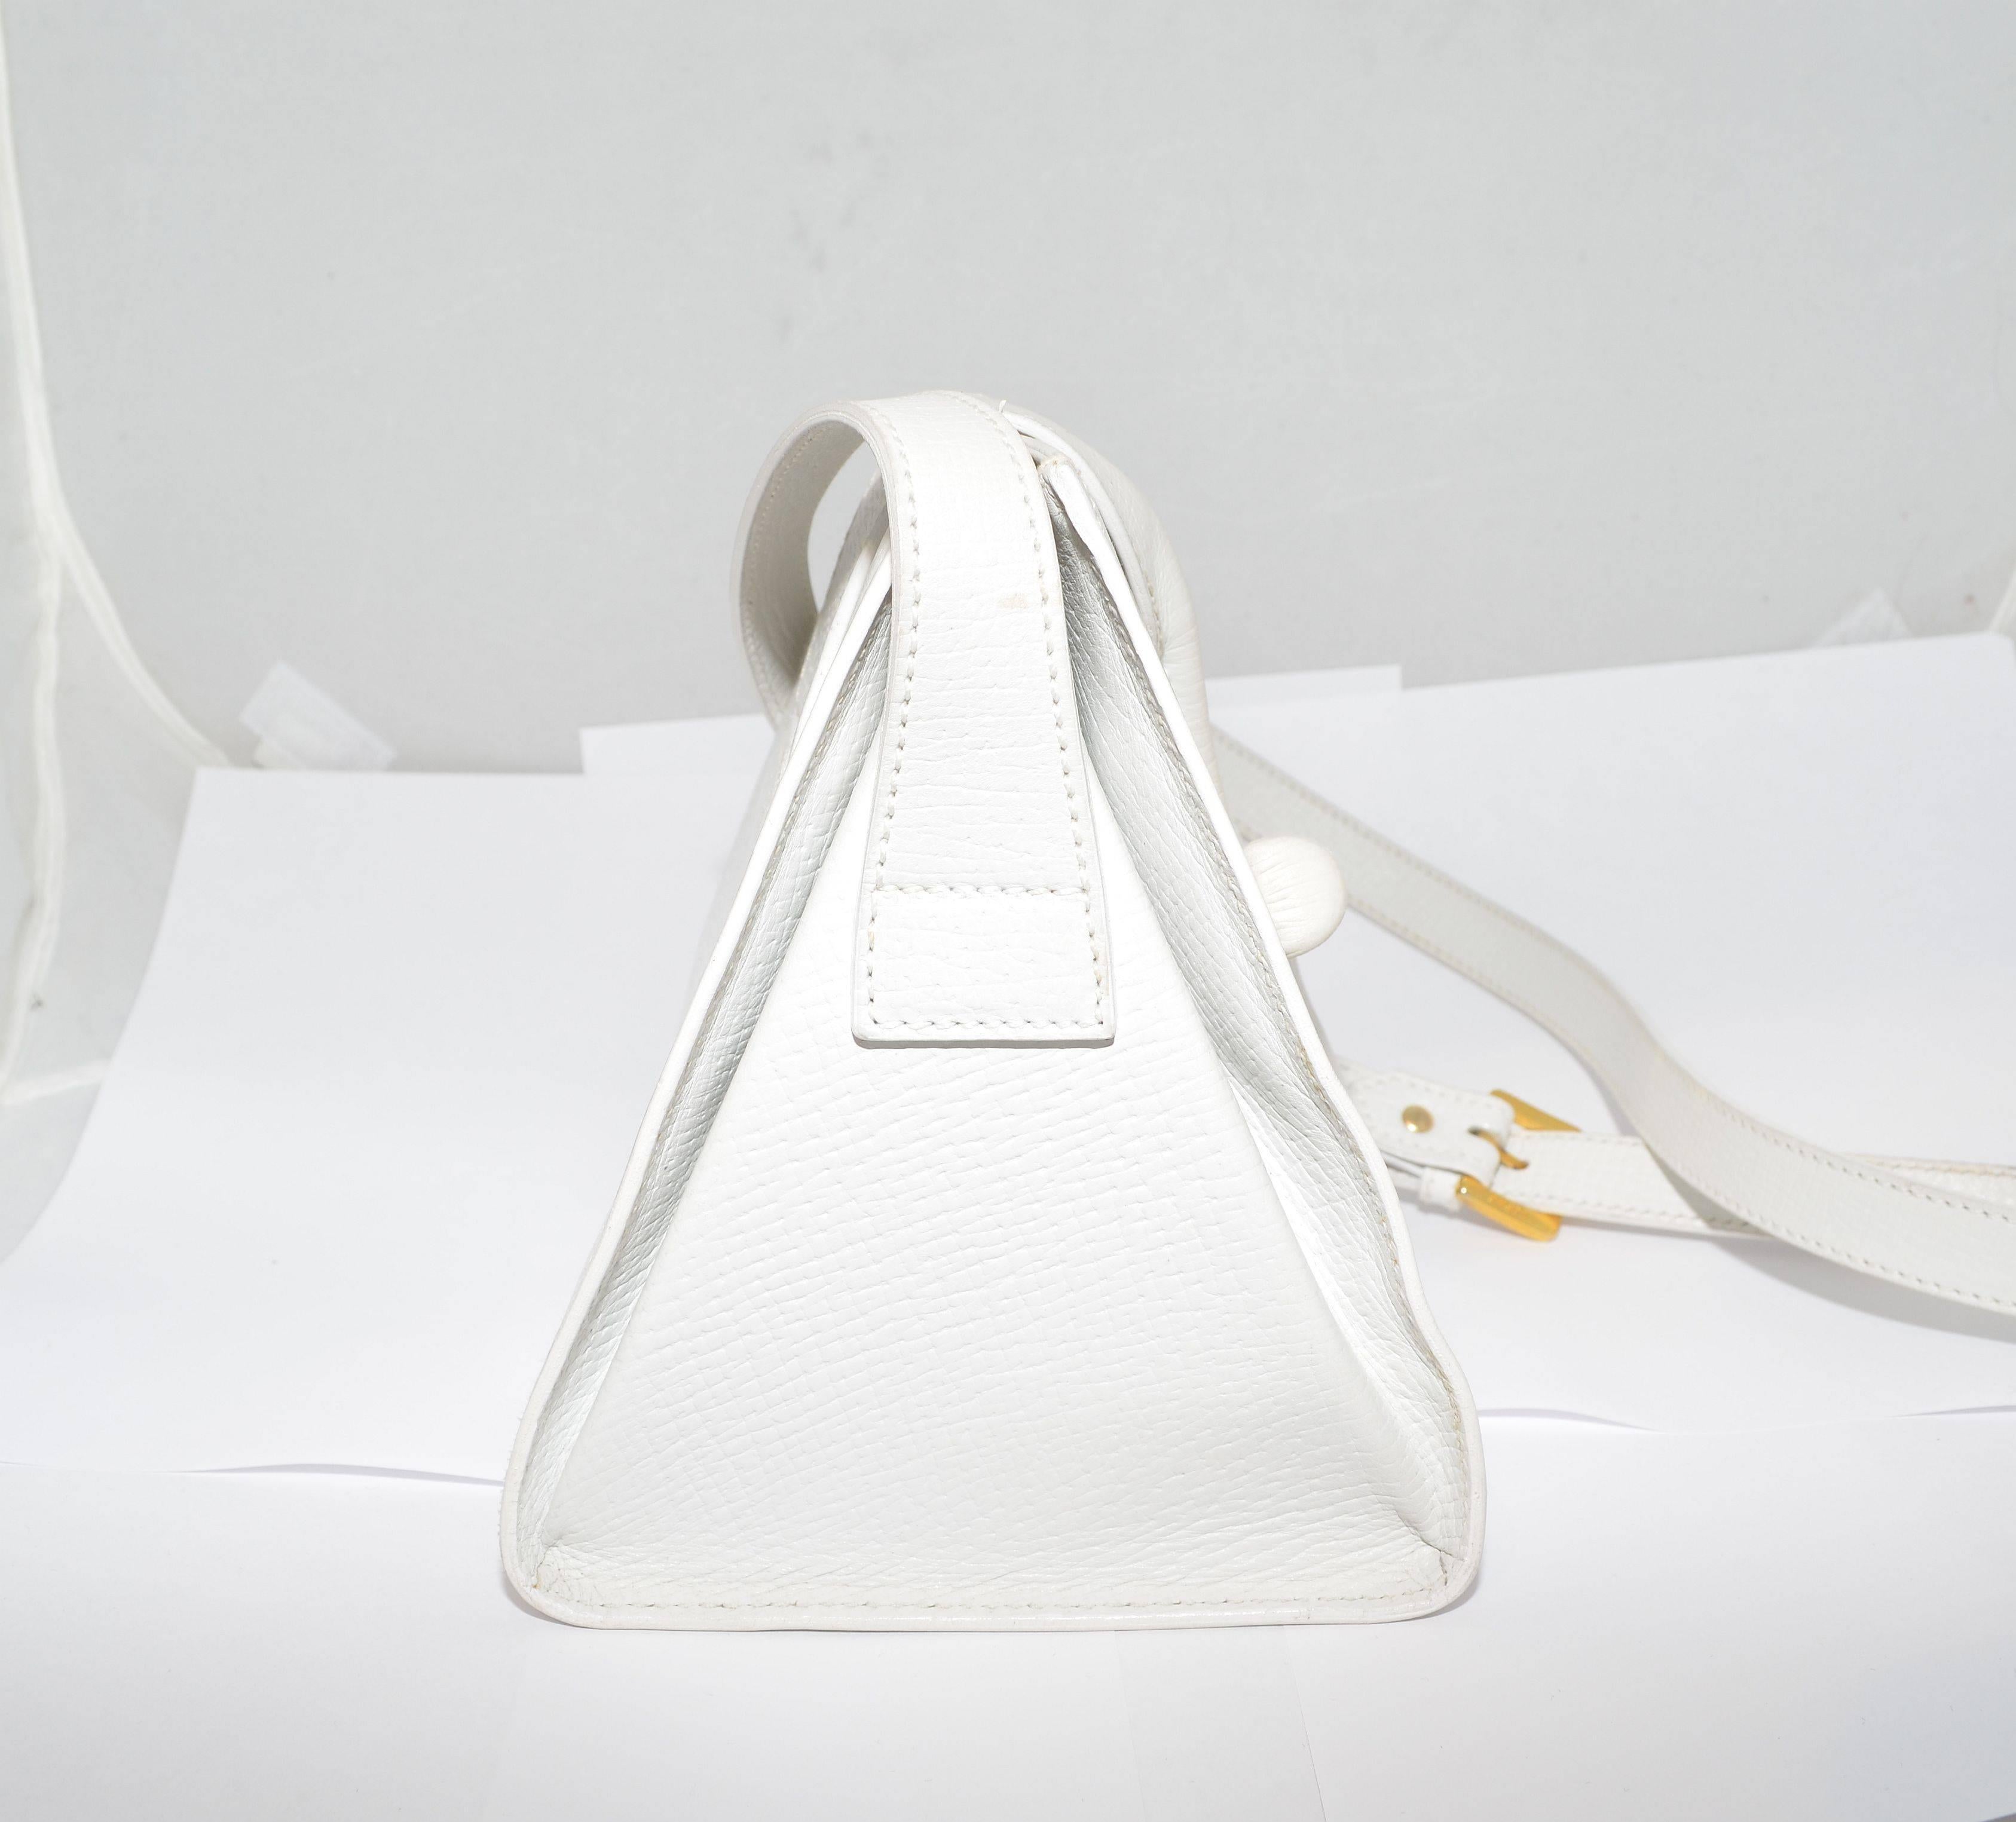 Loewe Vintage White Leather Pyramid Triangle Cross Body or Shoulder Bag

Vintage Loewe leather bag featured in white has a toggle and strap closure at the top, gold-tone buckle to adjust length of the shoulder strap. Bag is leather lined and made